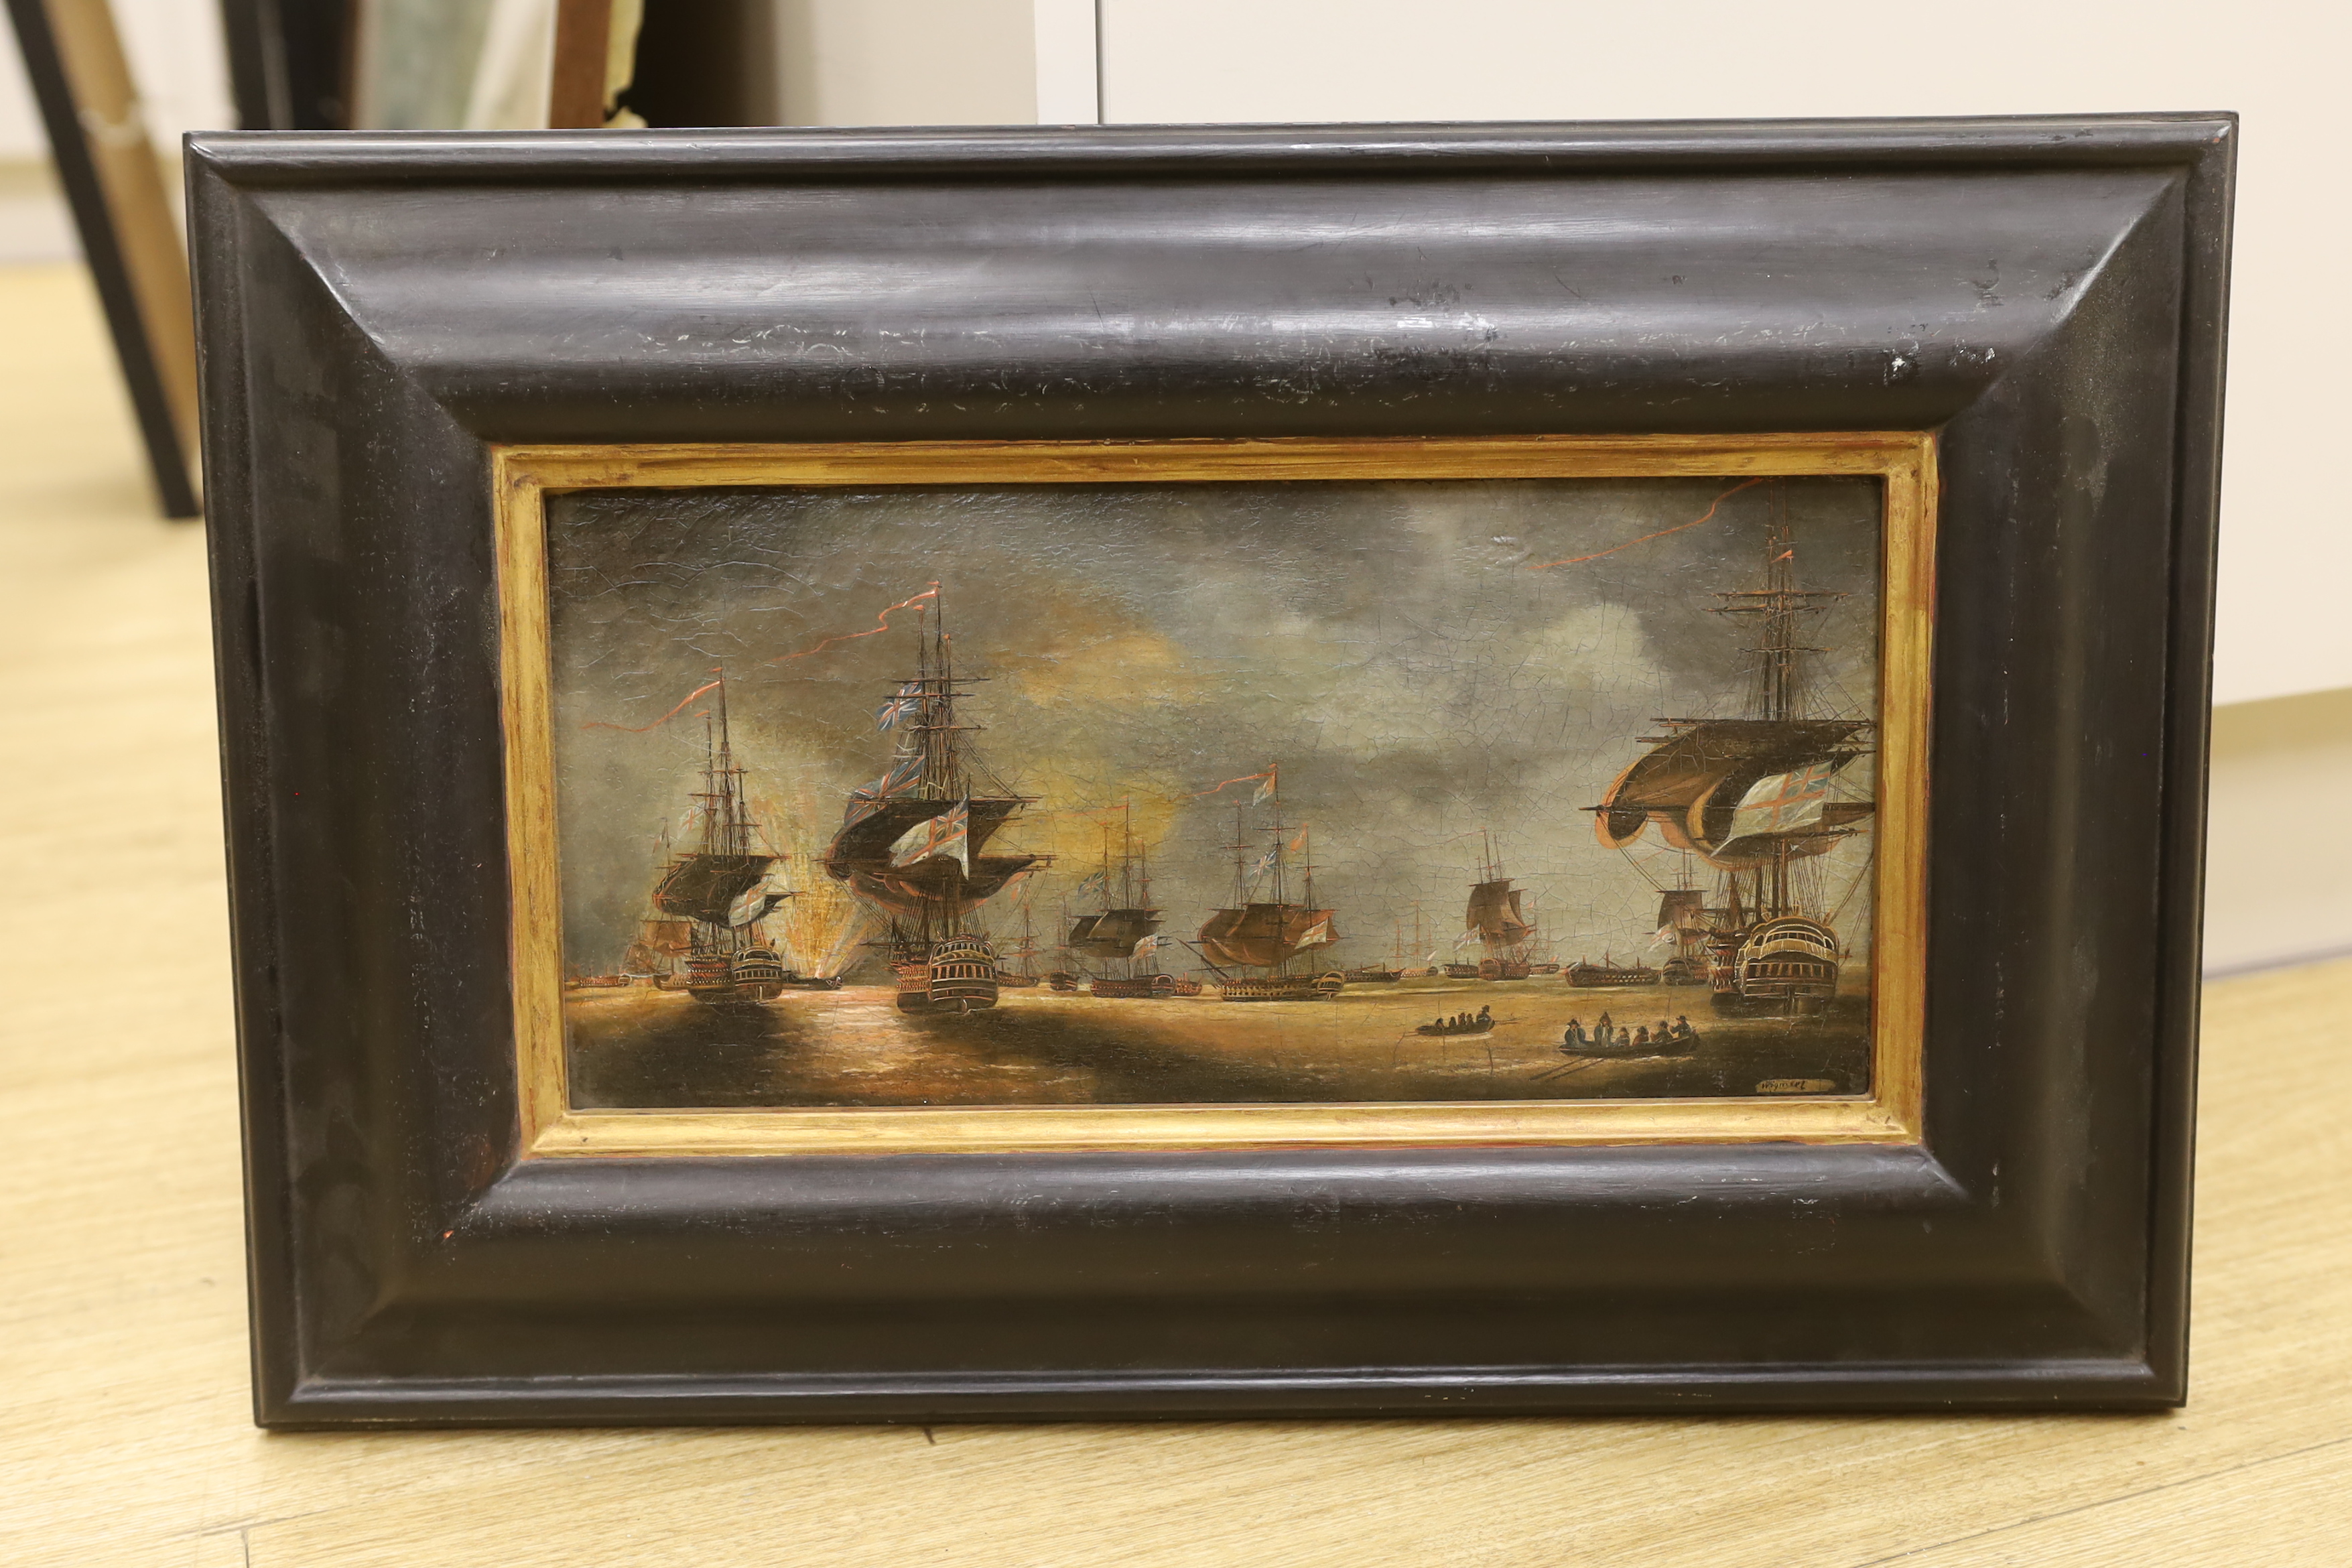 Wigmore (?), 19th century, oil on canvas, British naval and fire ships in a harbour, signed, 17 x - Image 2 of 3